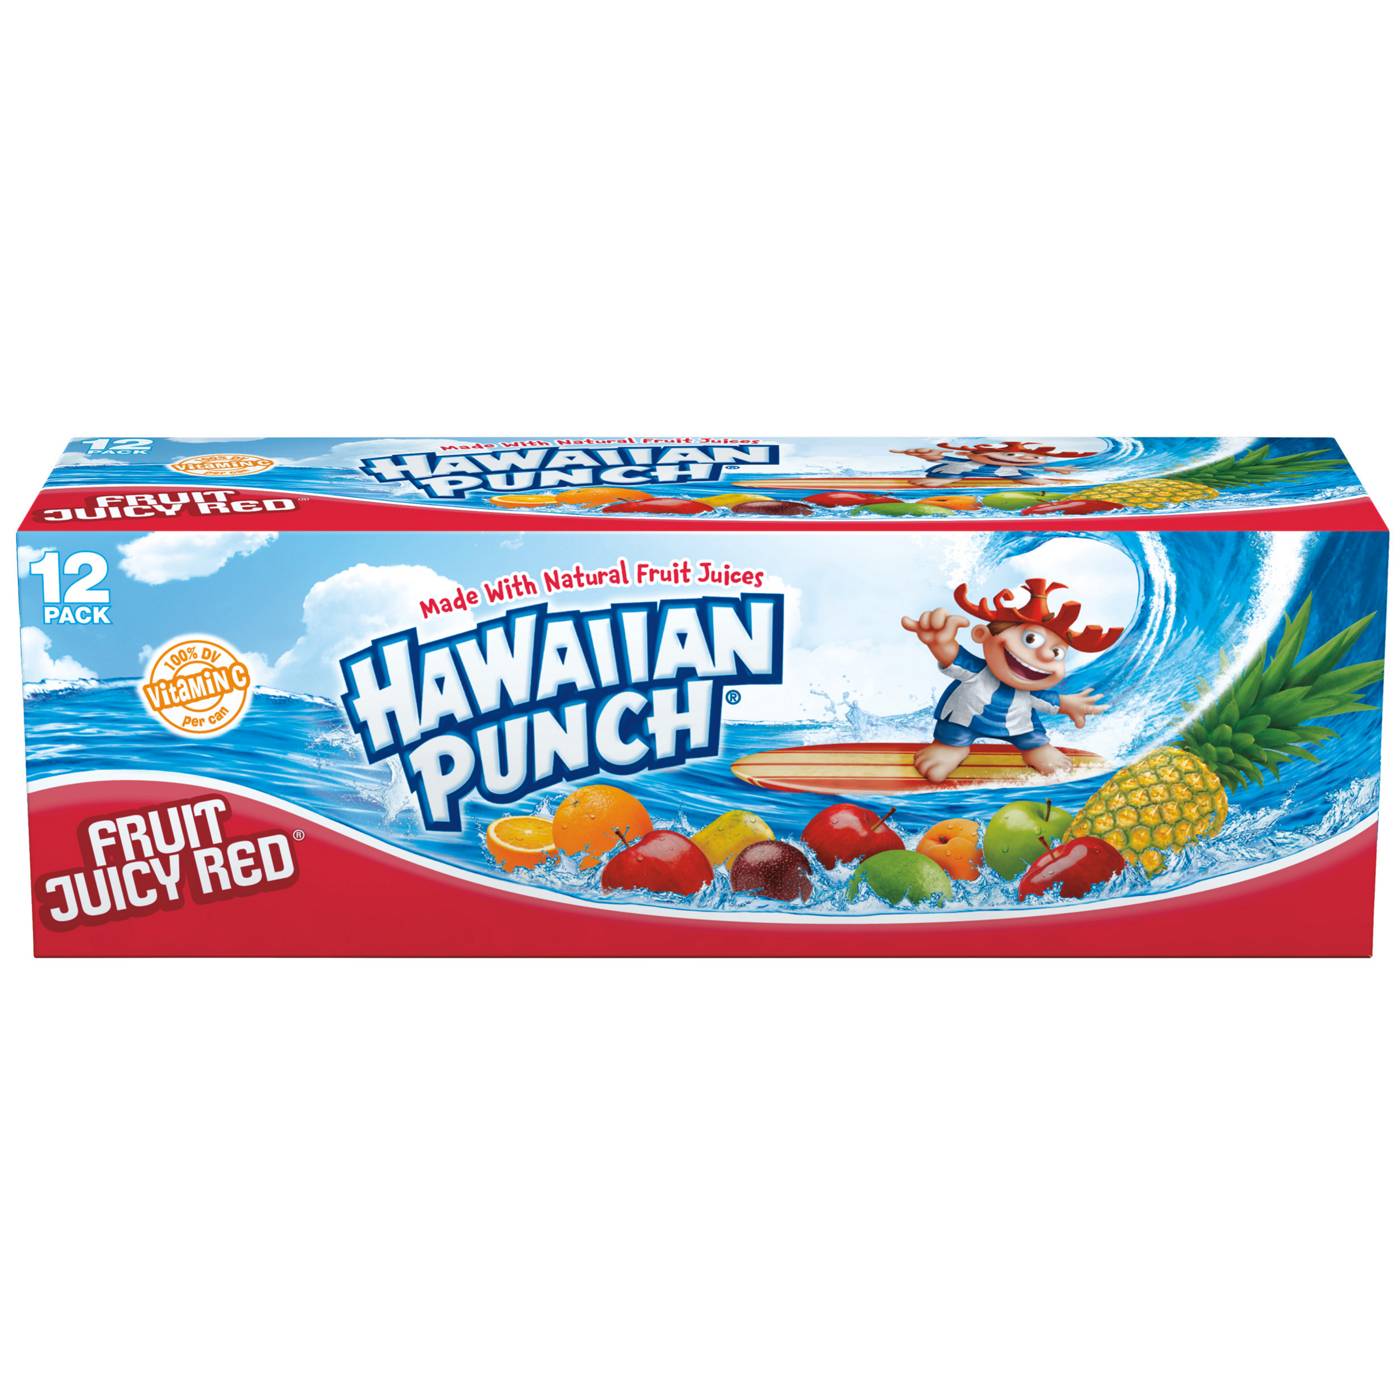 Hawaiian Punch Fruit Juicy Red Juice Drink 12 oz Cans; image 2 of 2